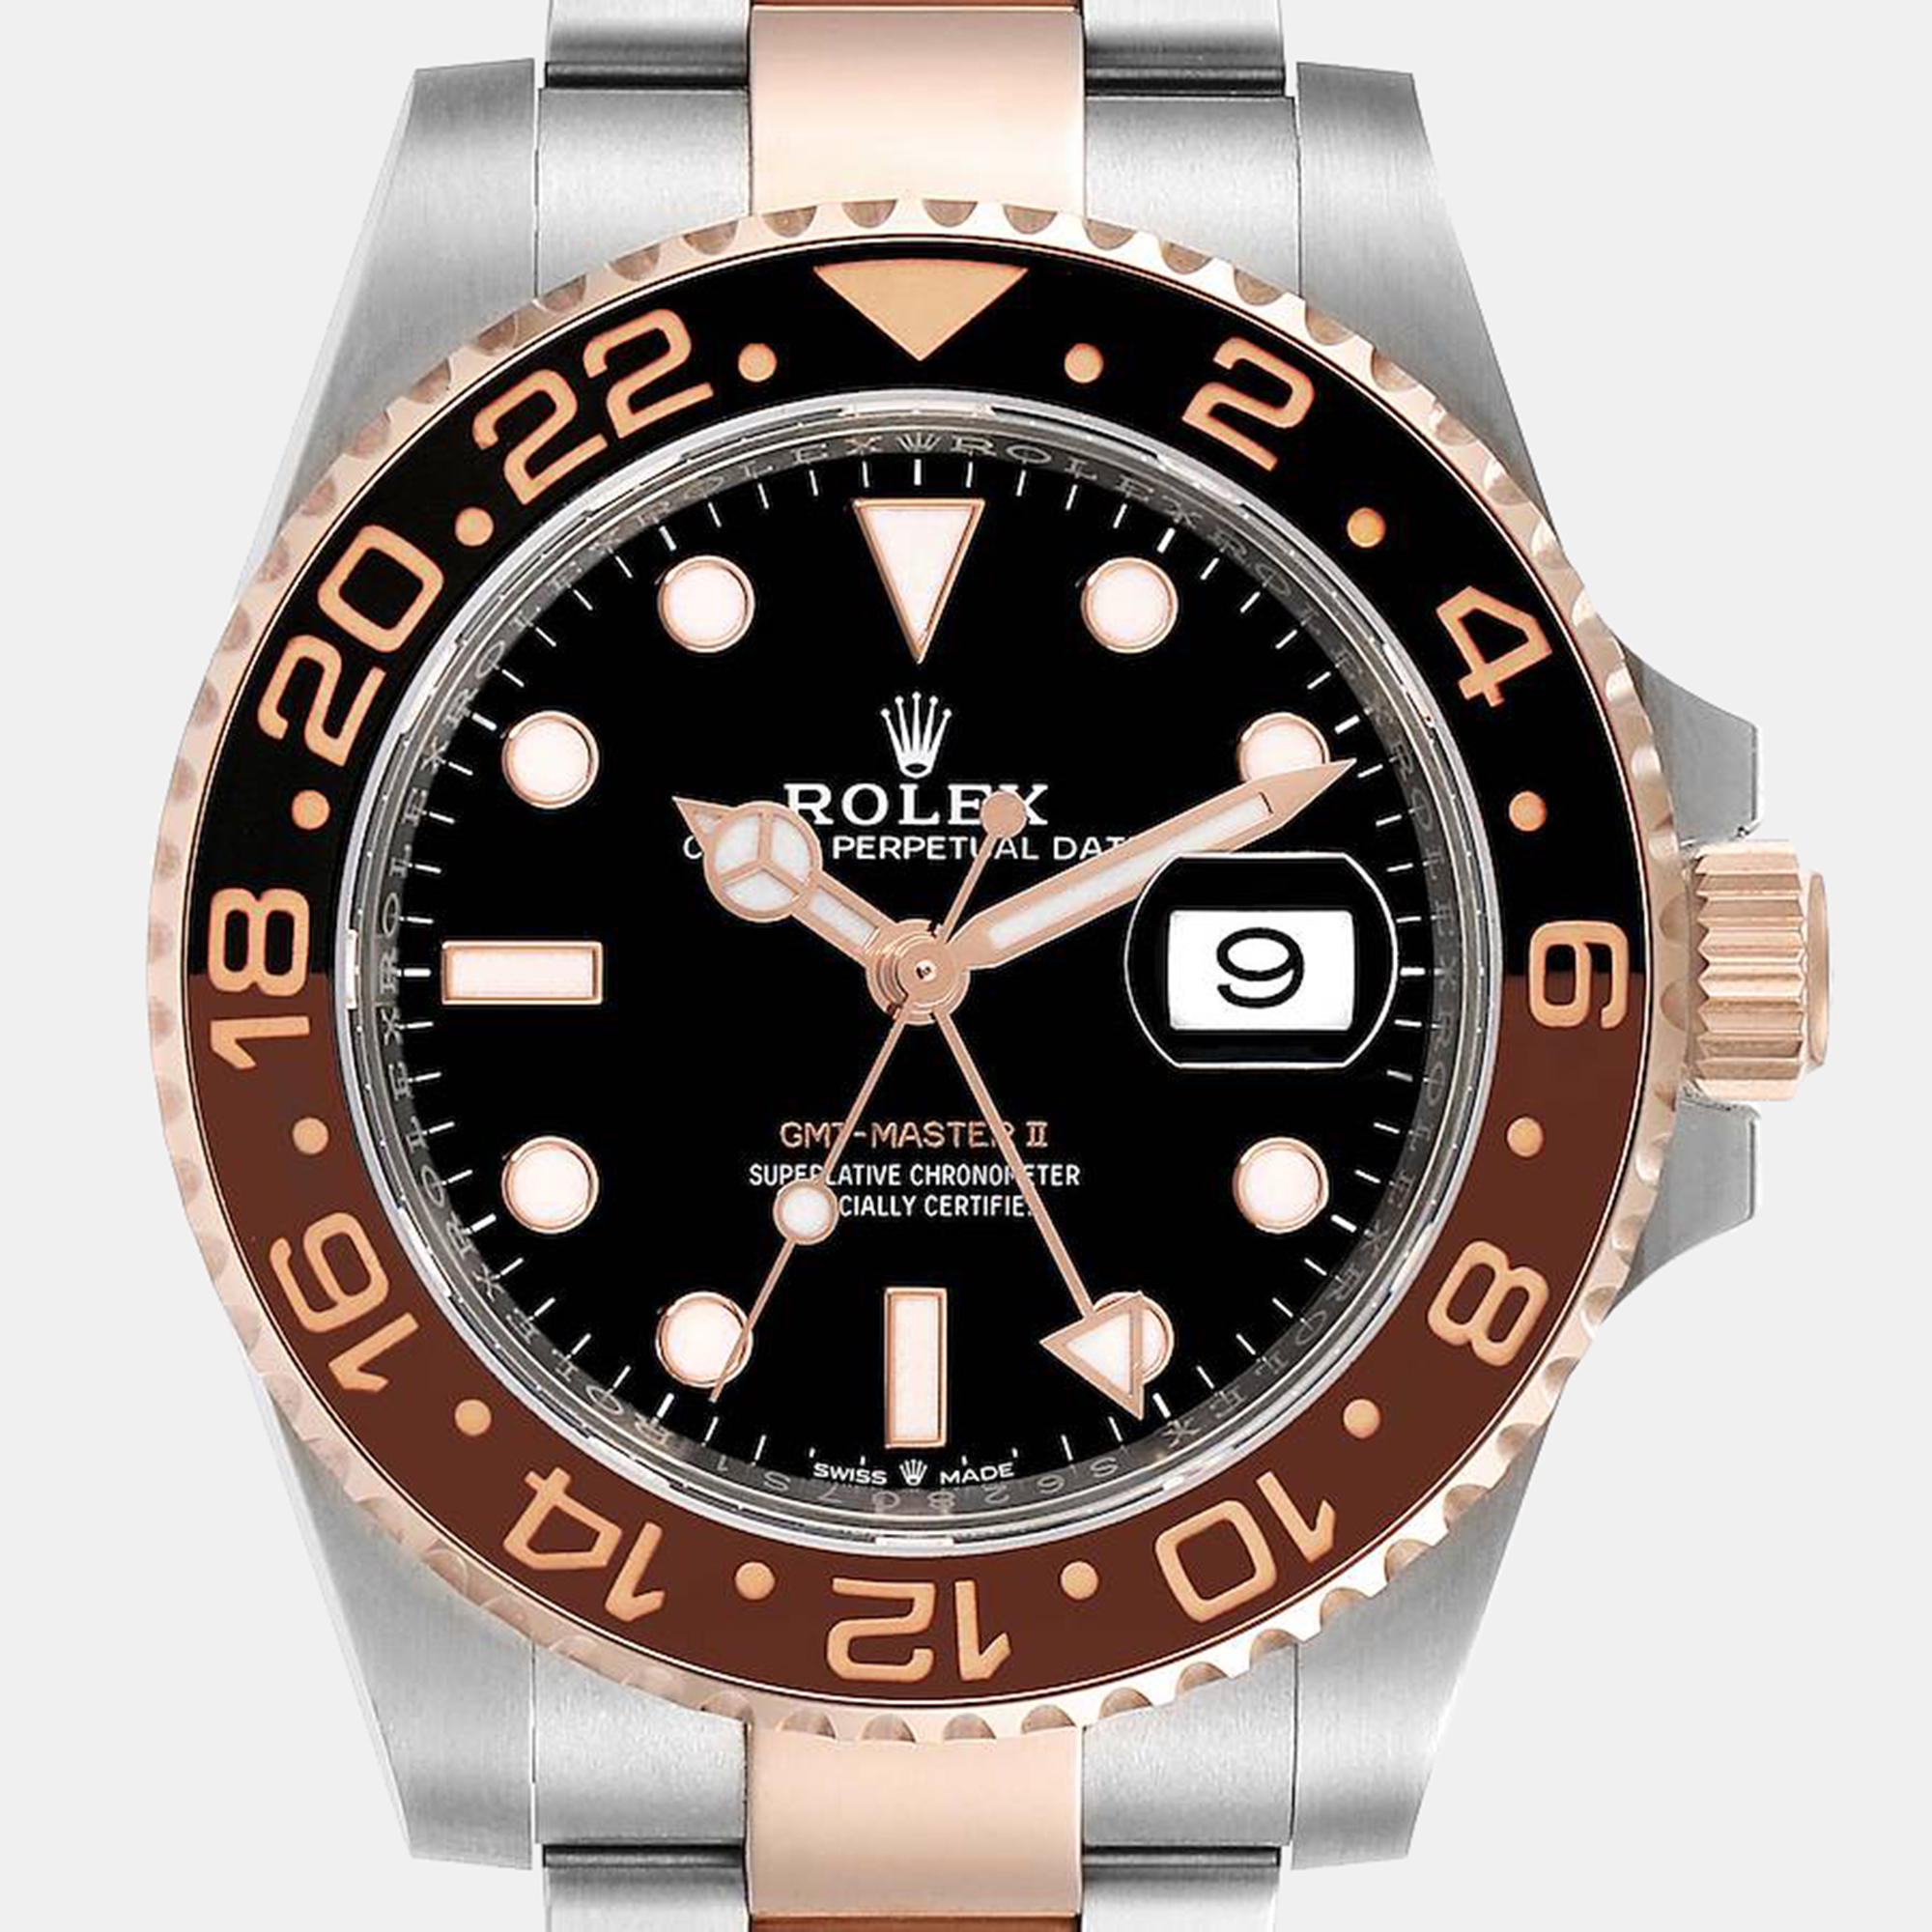 Rolex Rootbeer Stainless Steel &18K Rose Gold GMT-MASTER II Men's Wristwatch 40 Mm